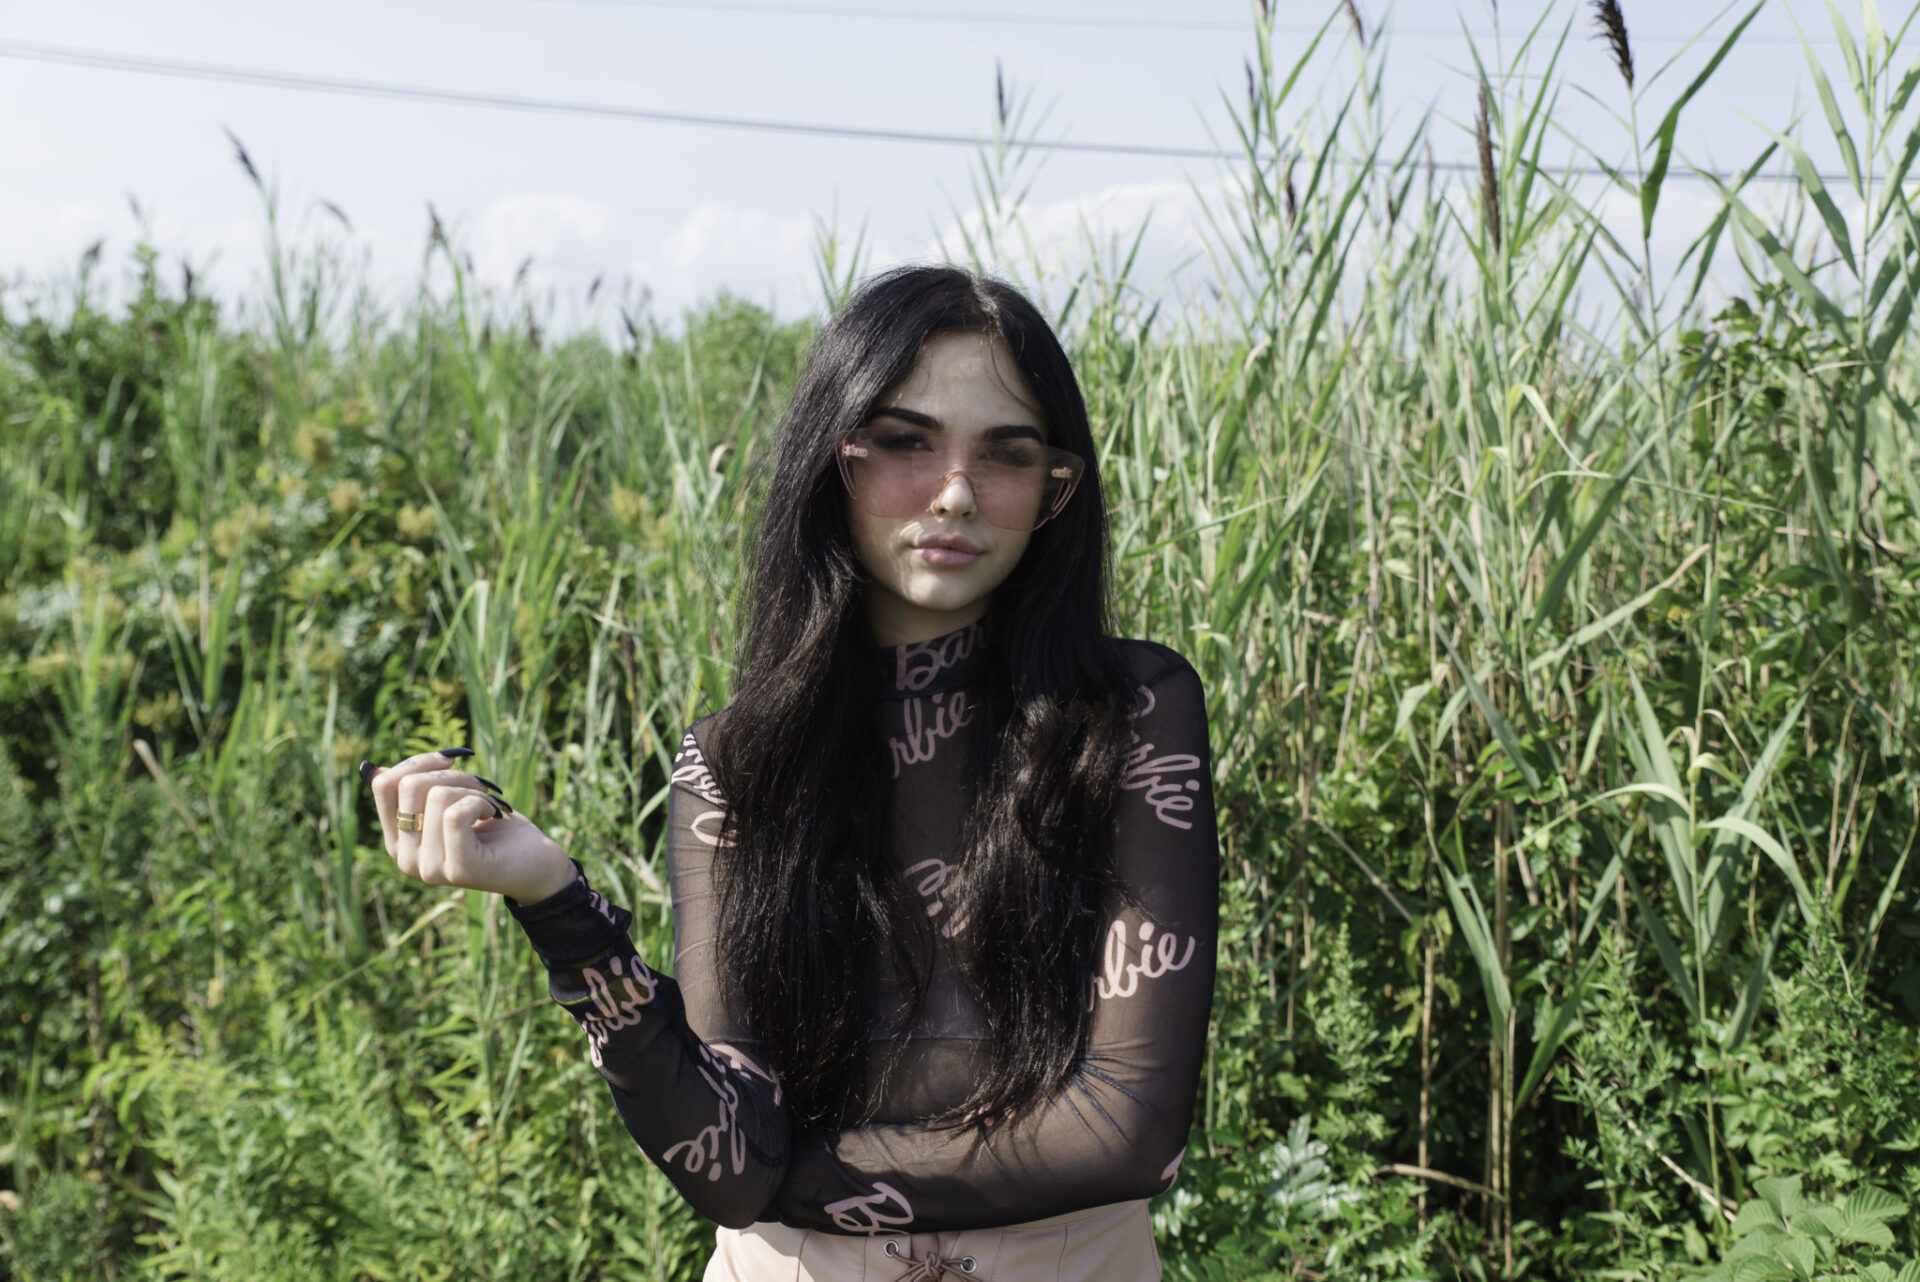 Maggie Lindemann on ‘Pretty Girl’: “We all have stories”